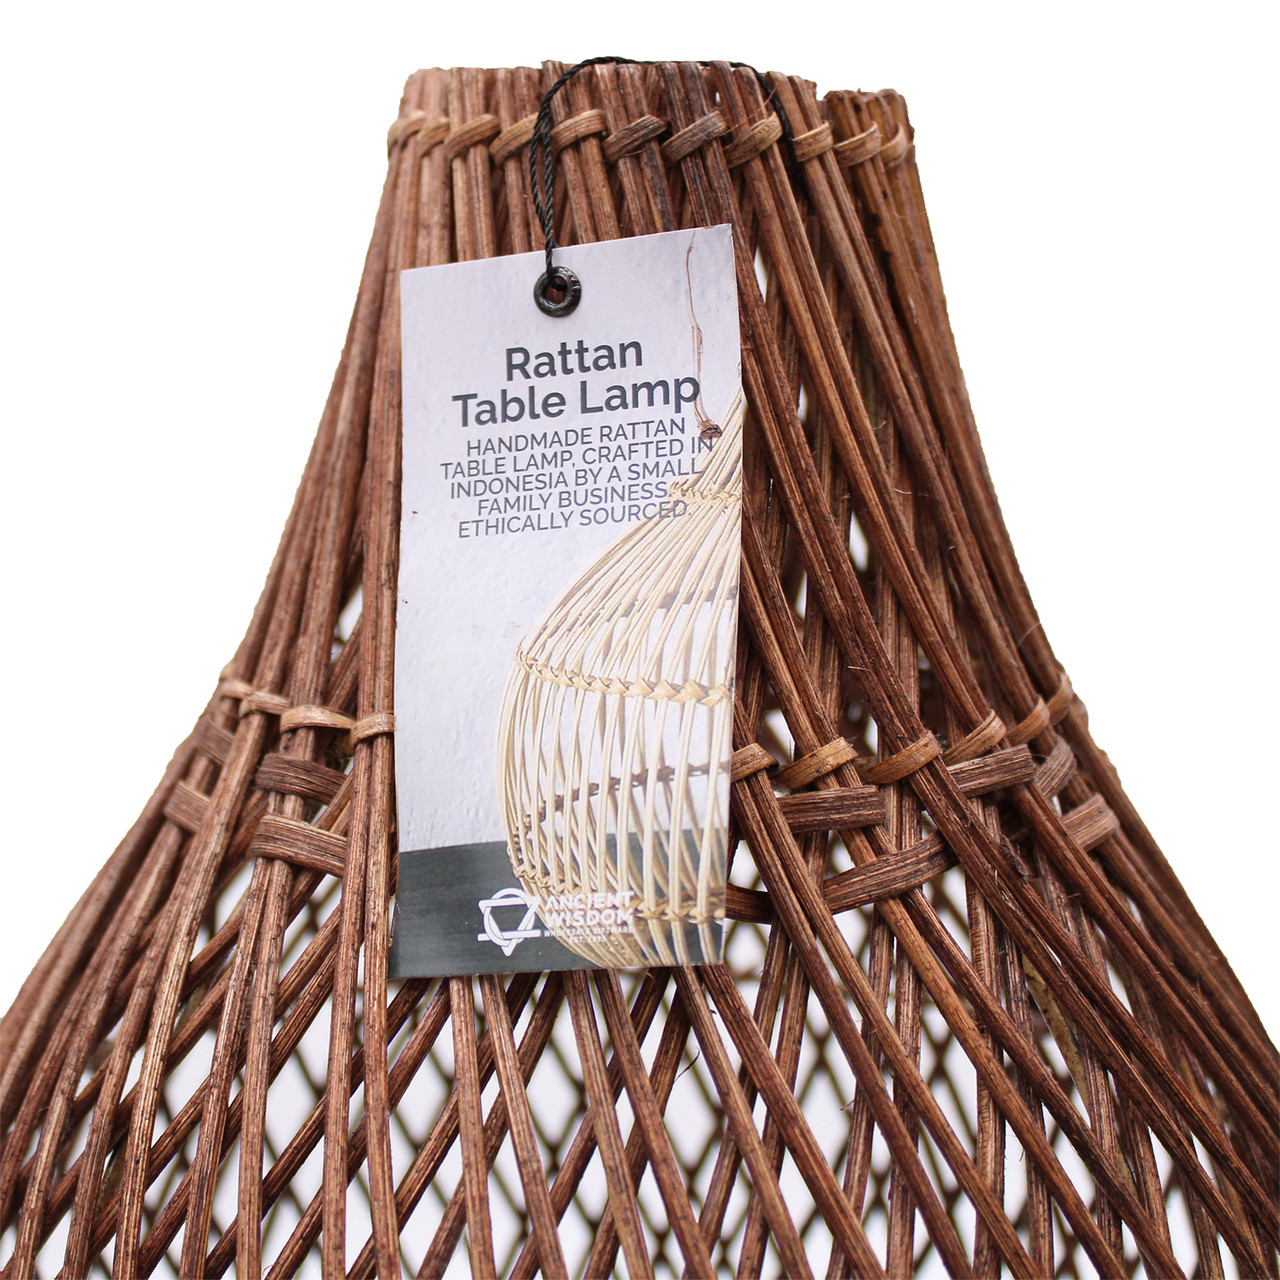 Rattan Table Lamp - Dark Brown Colour - Switched Cable and Bulb - 39cm Tall